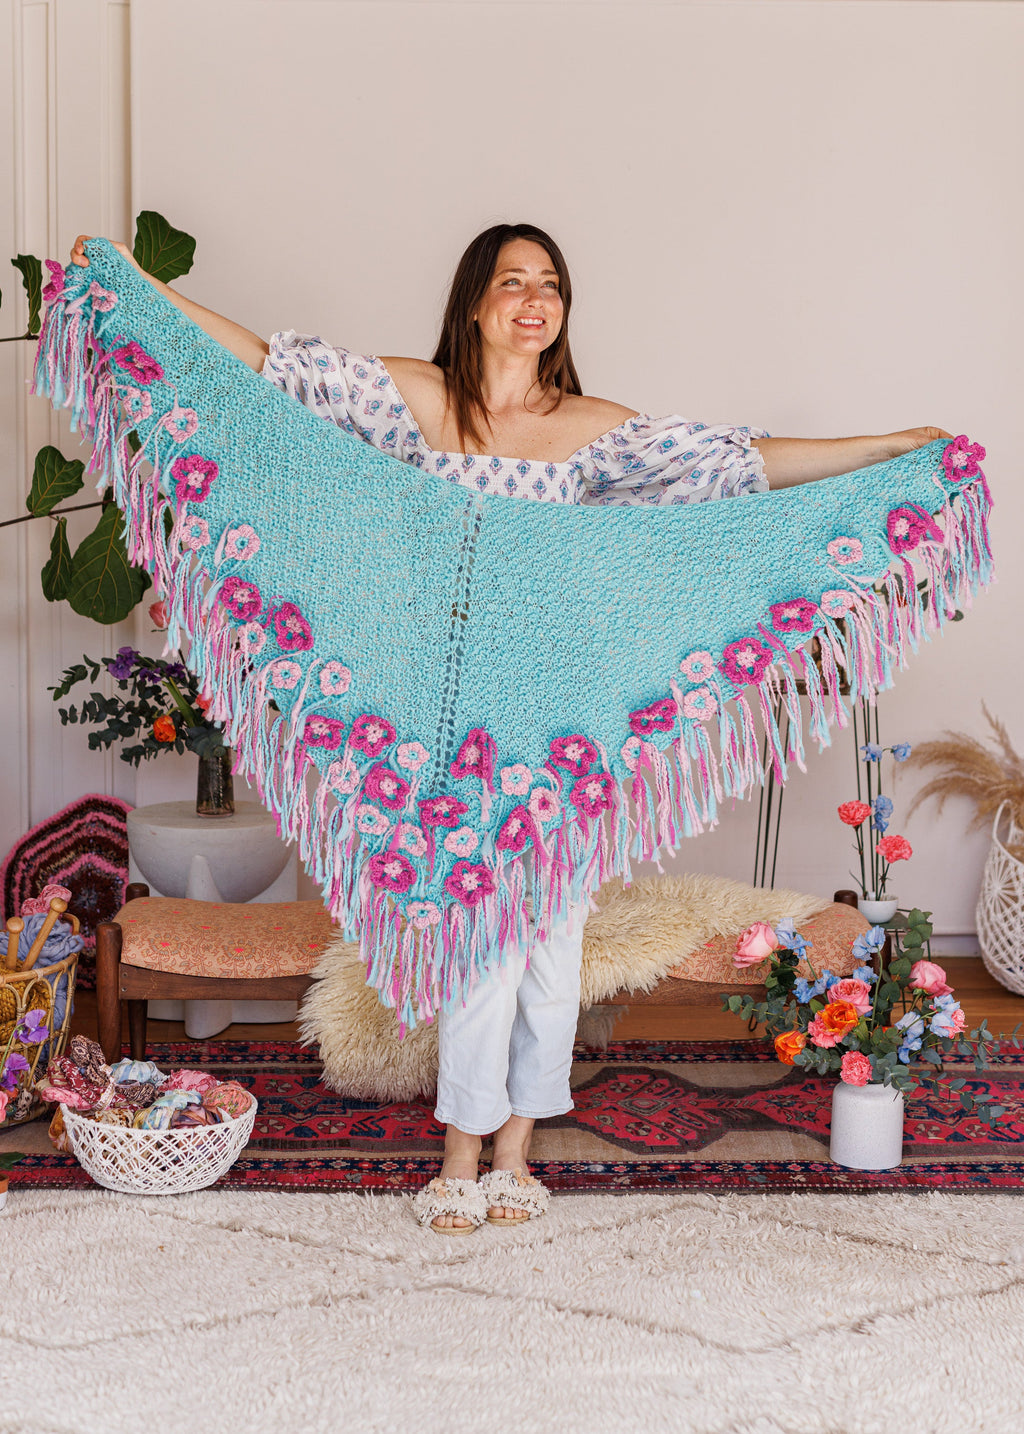 Model smiling while holding shawl in front of her entire wingspan